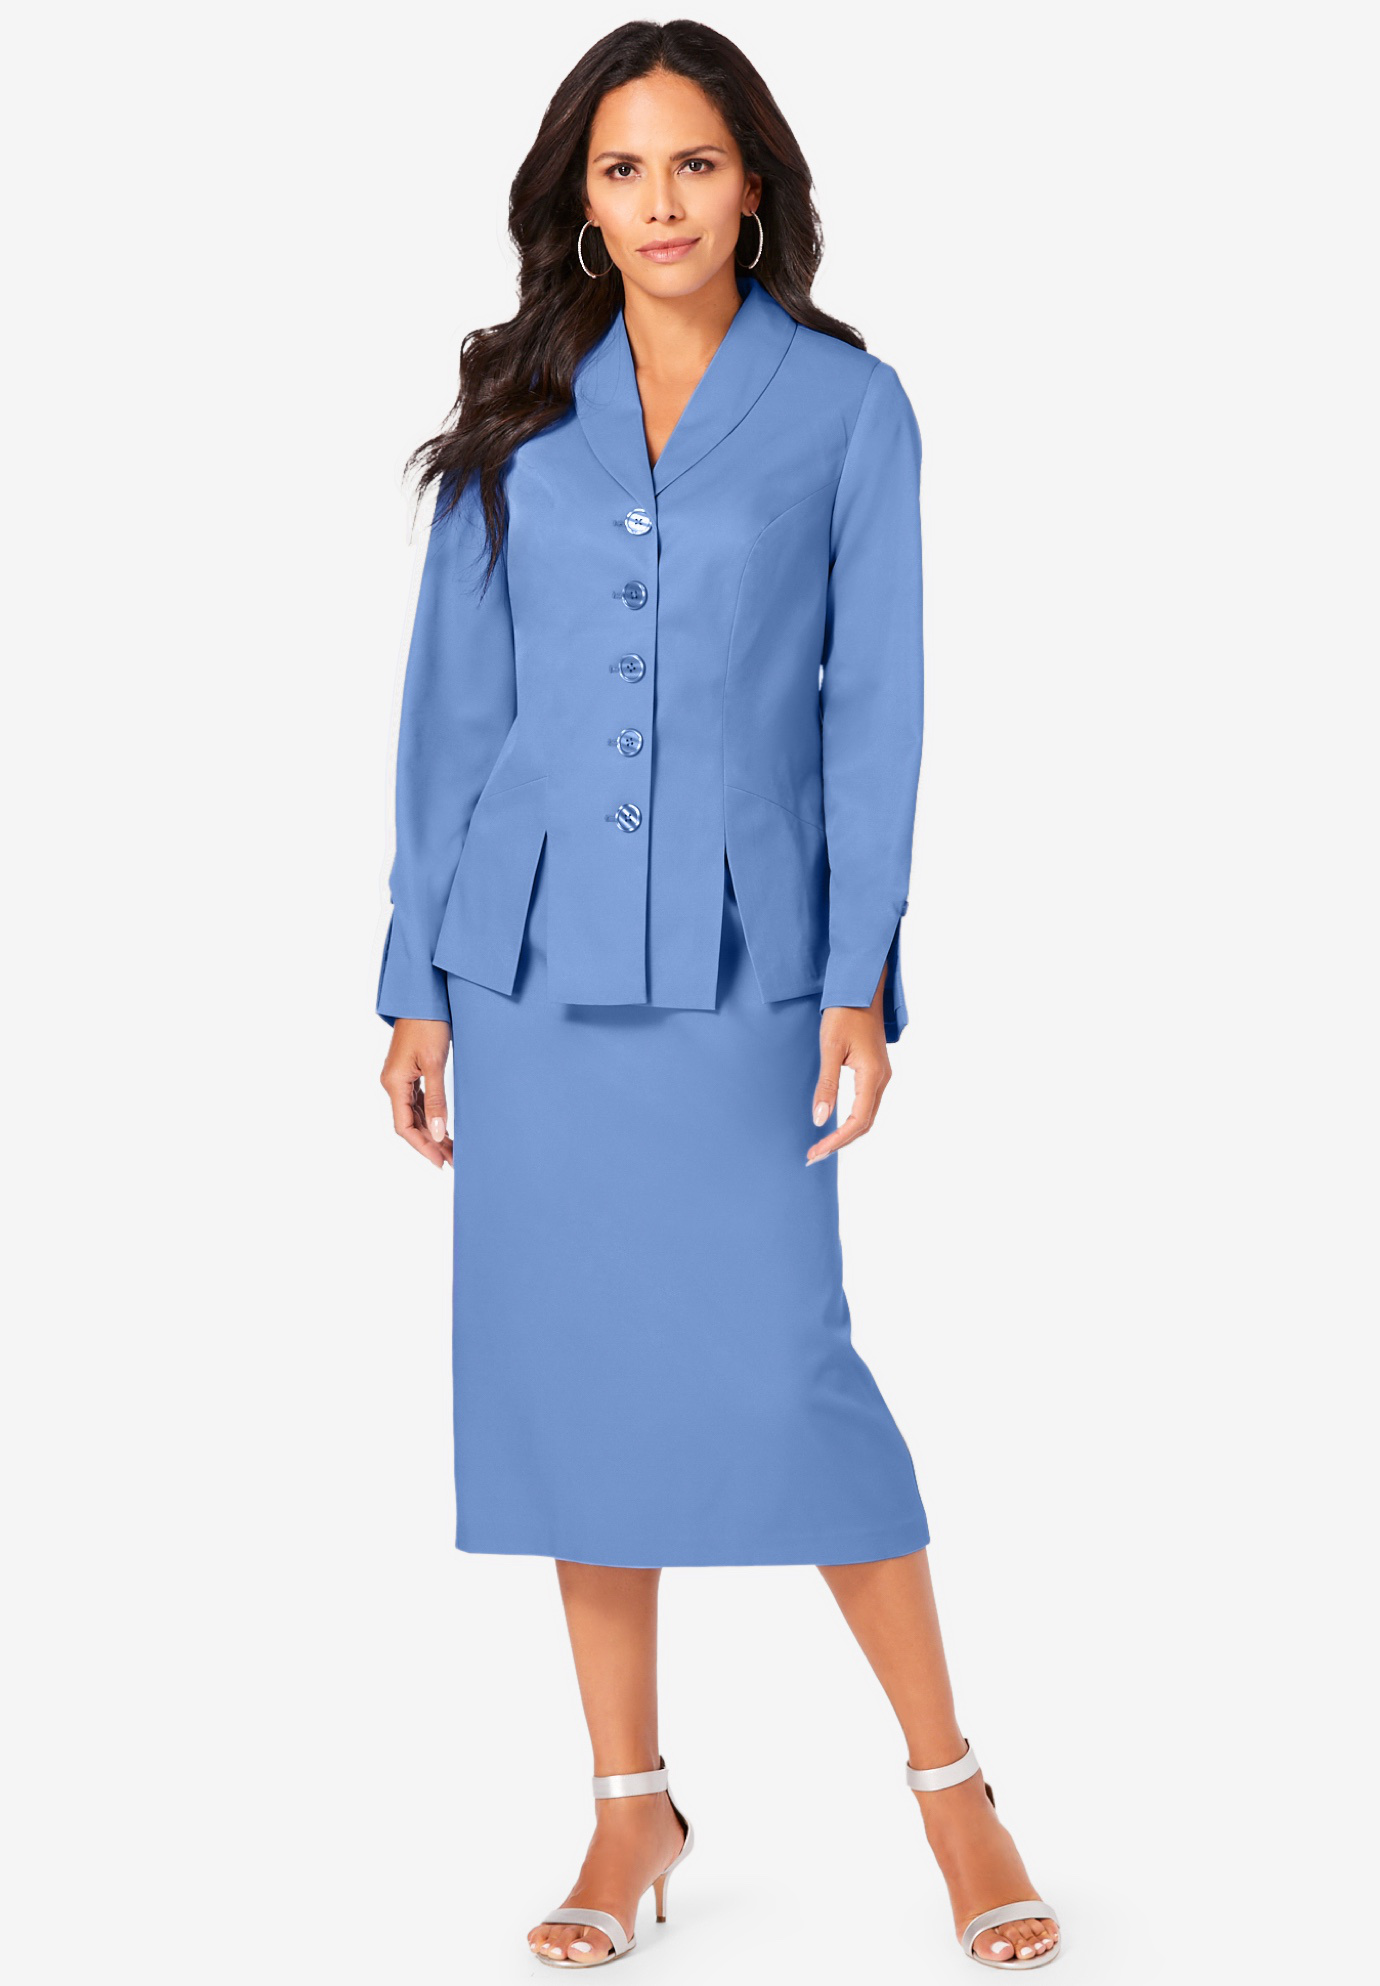 Two-Piece Skirt Suit with Shawl-Collar Jacket, 